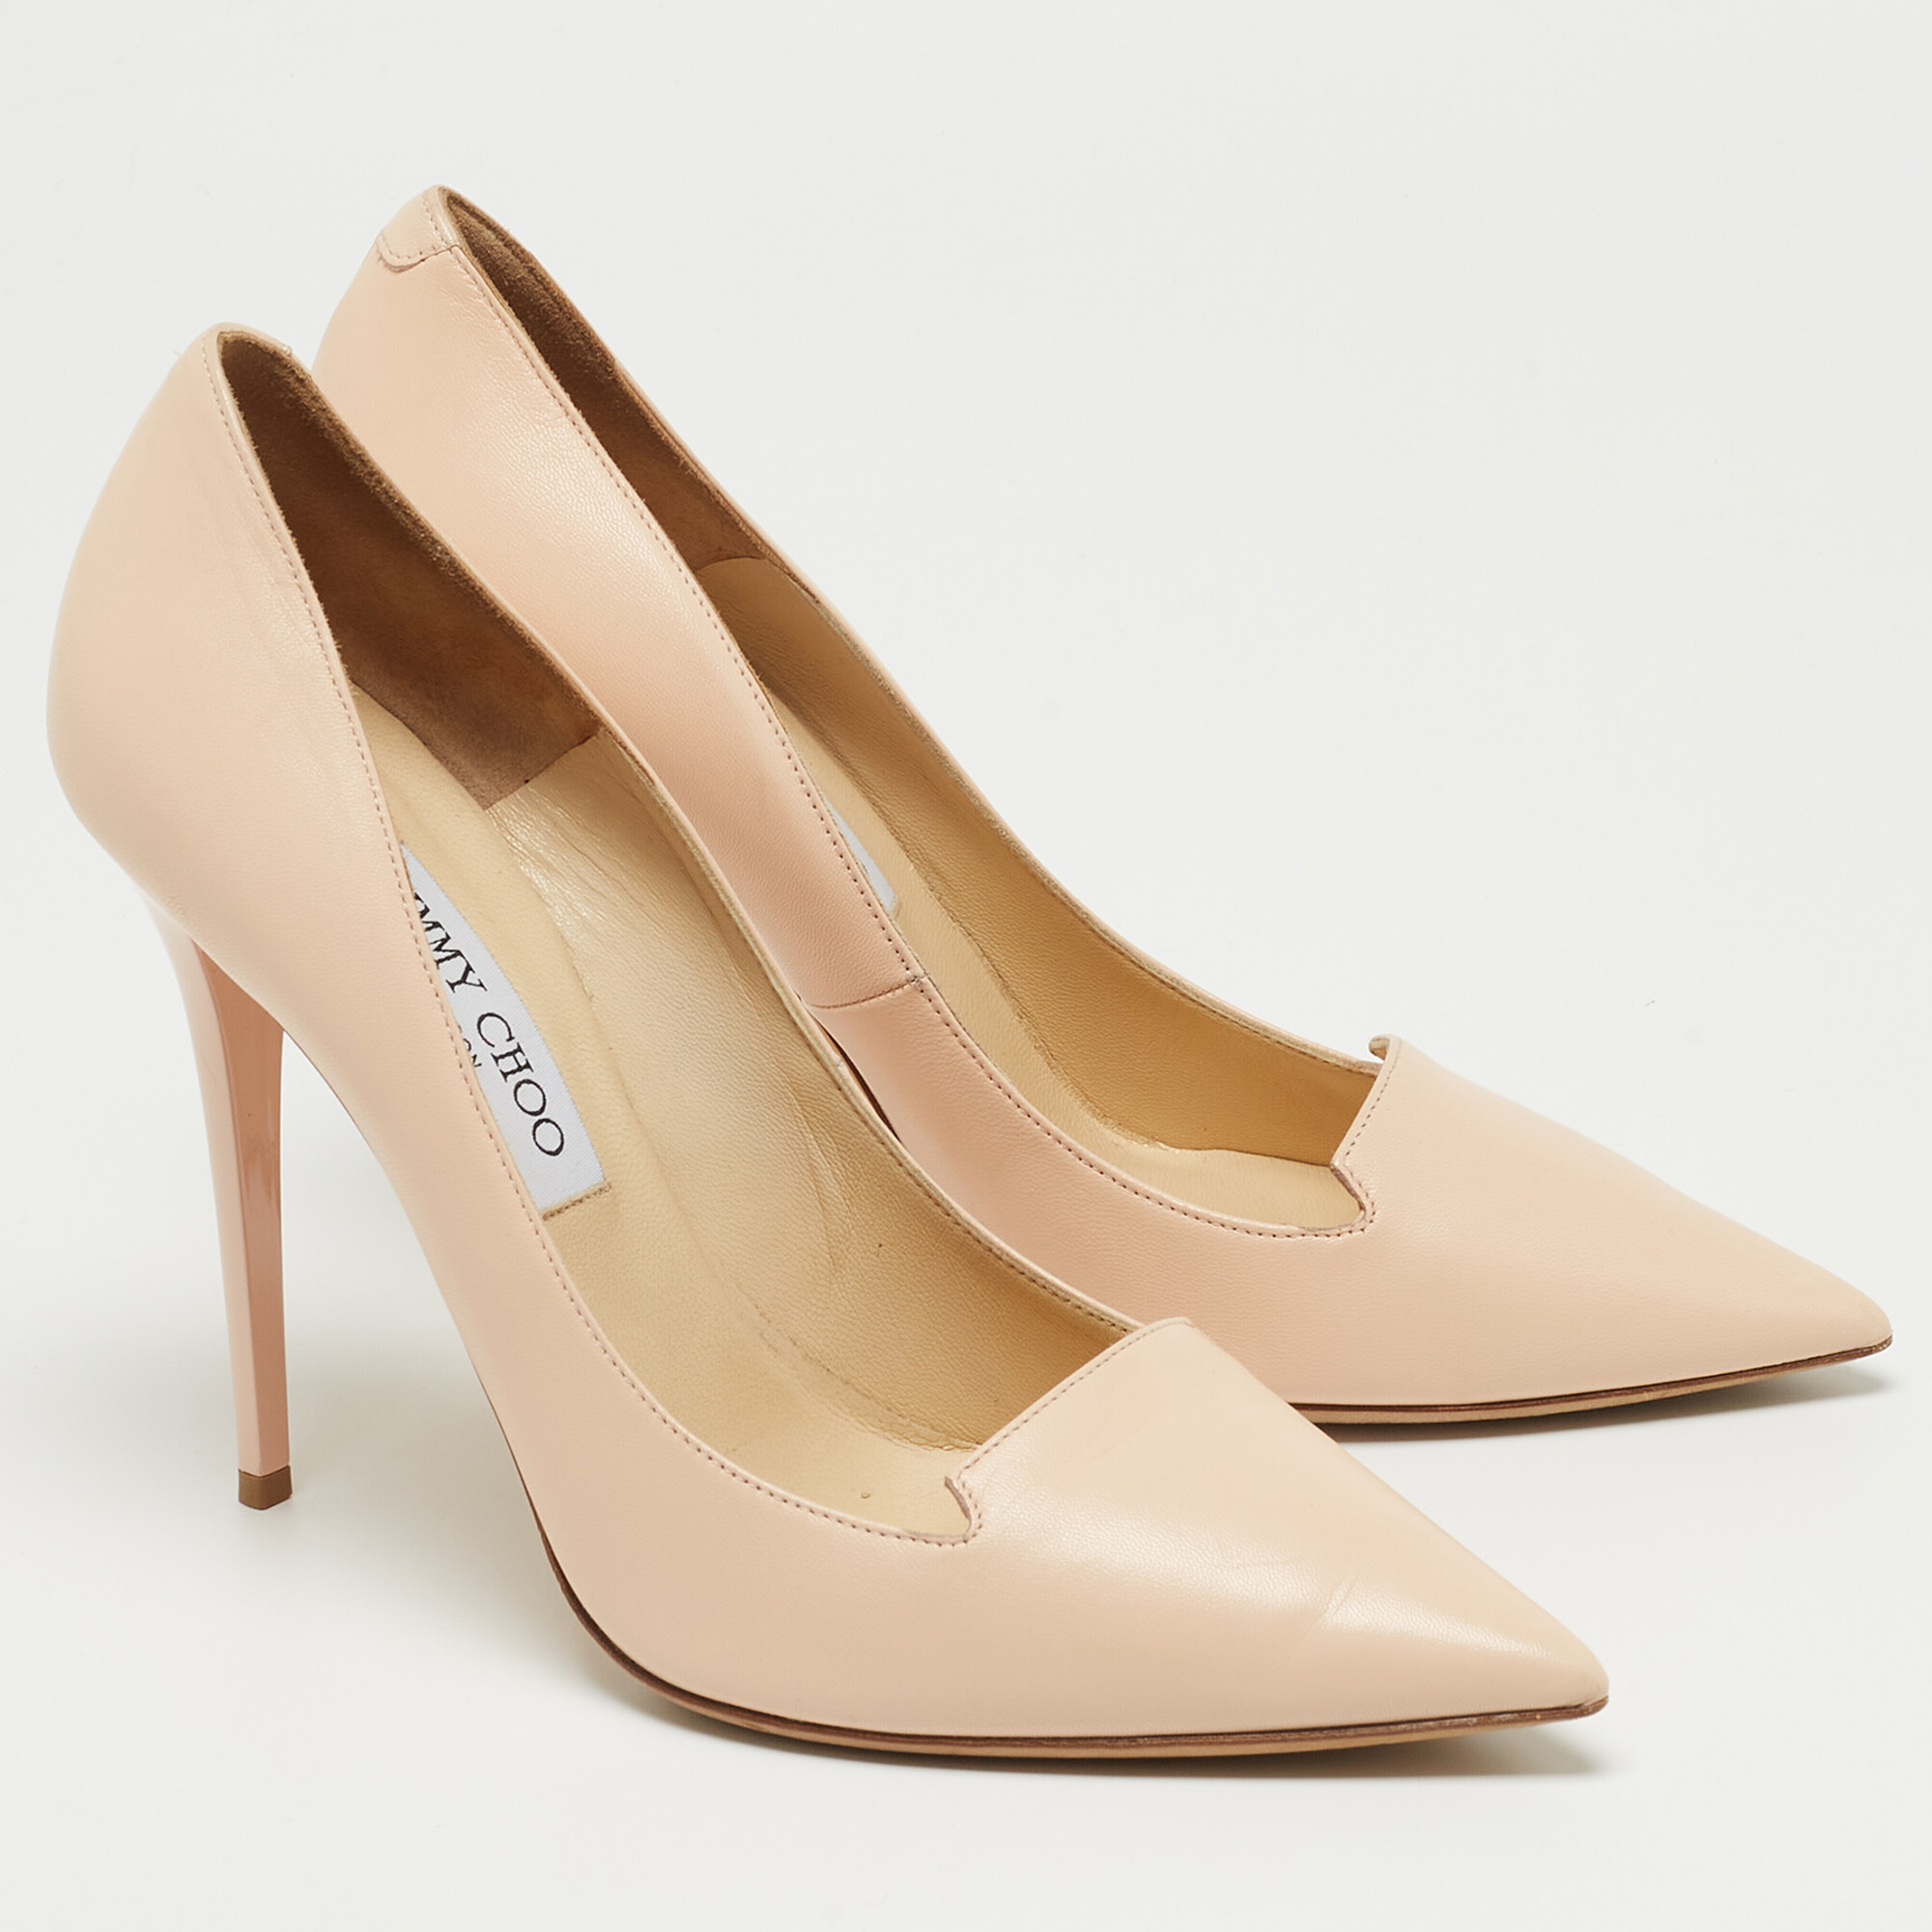 Jimmy Choo Beige Leather Pointed Toe Pumps Size 39